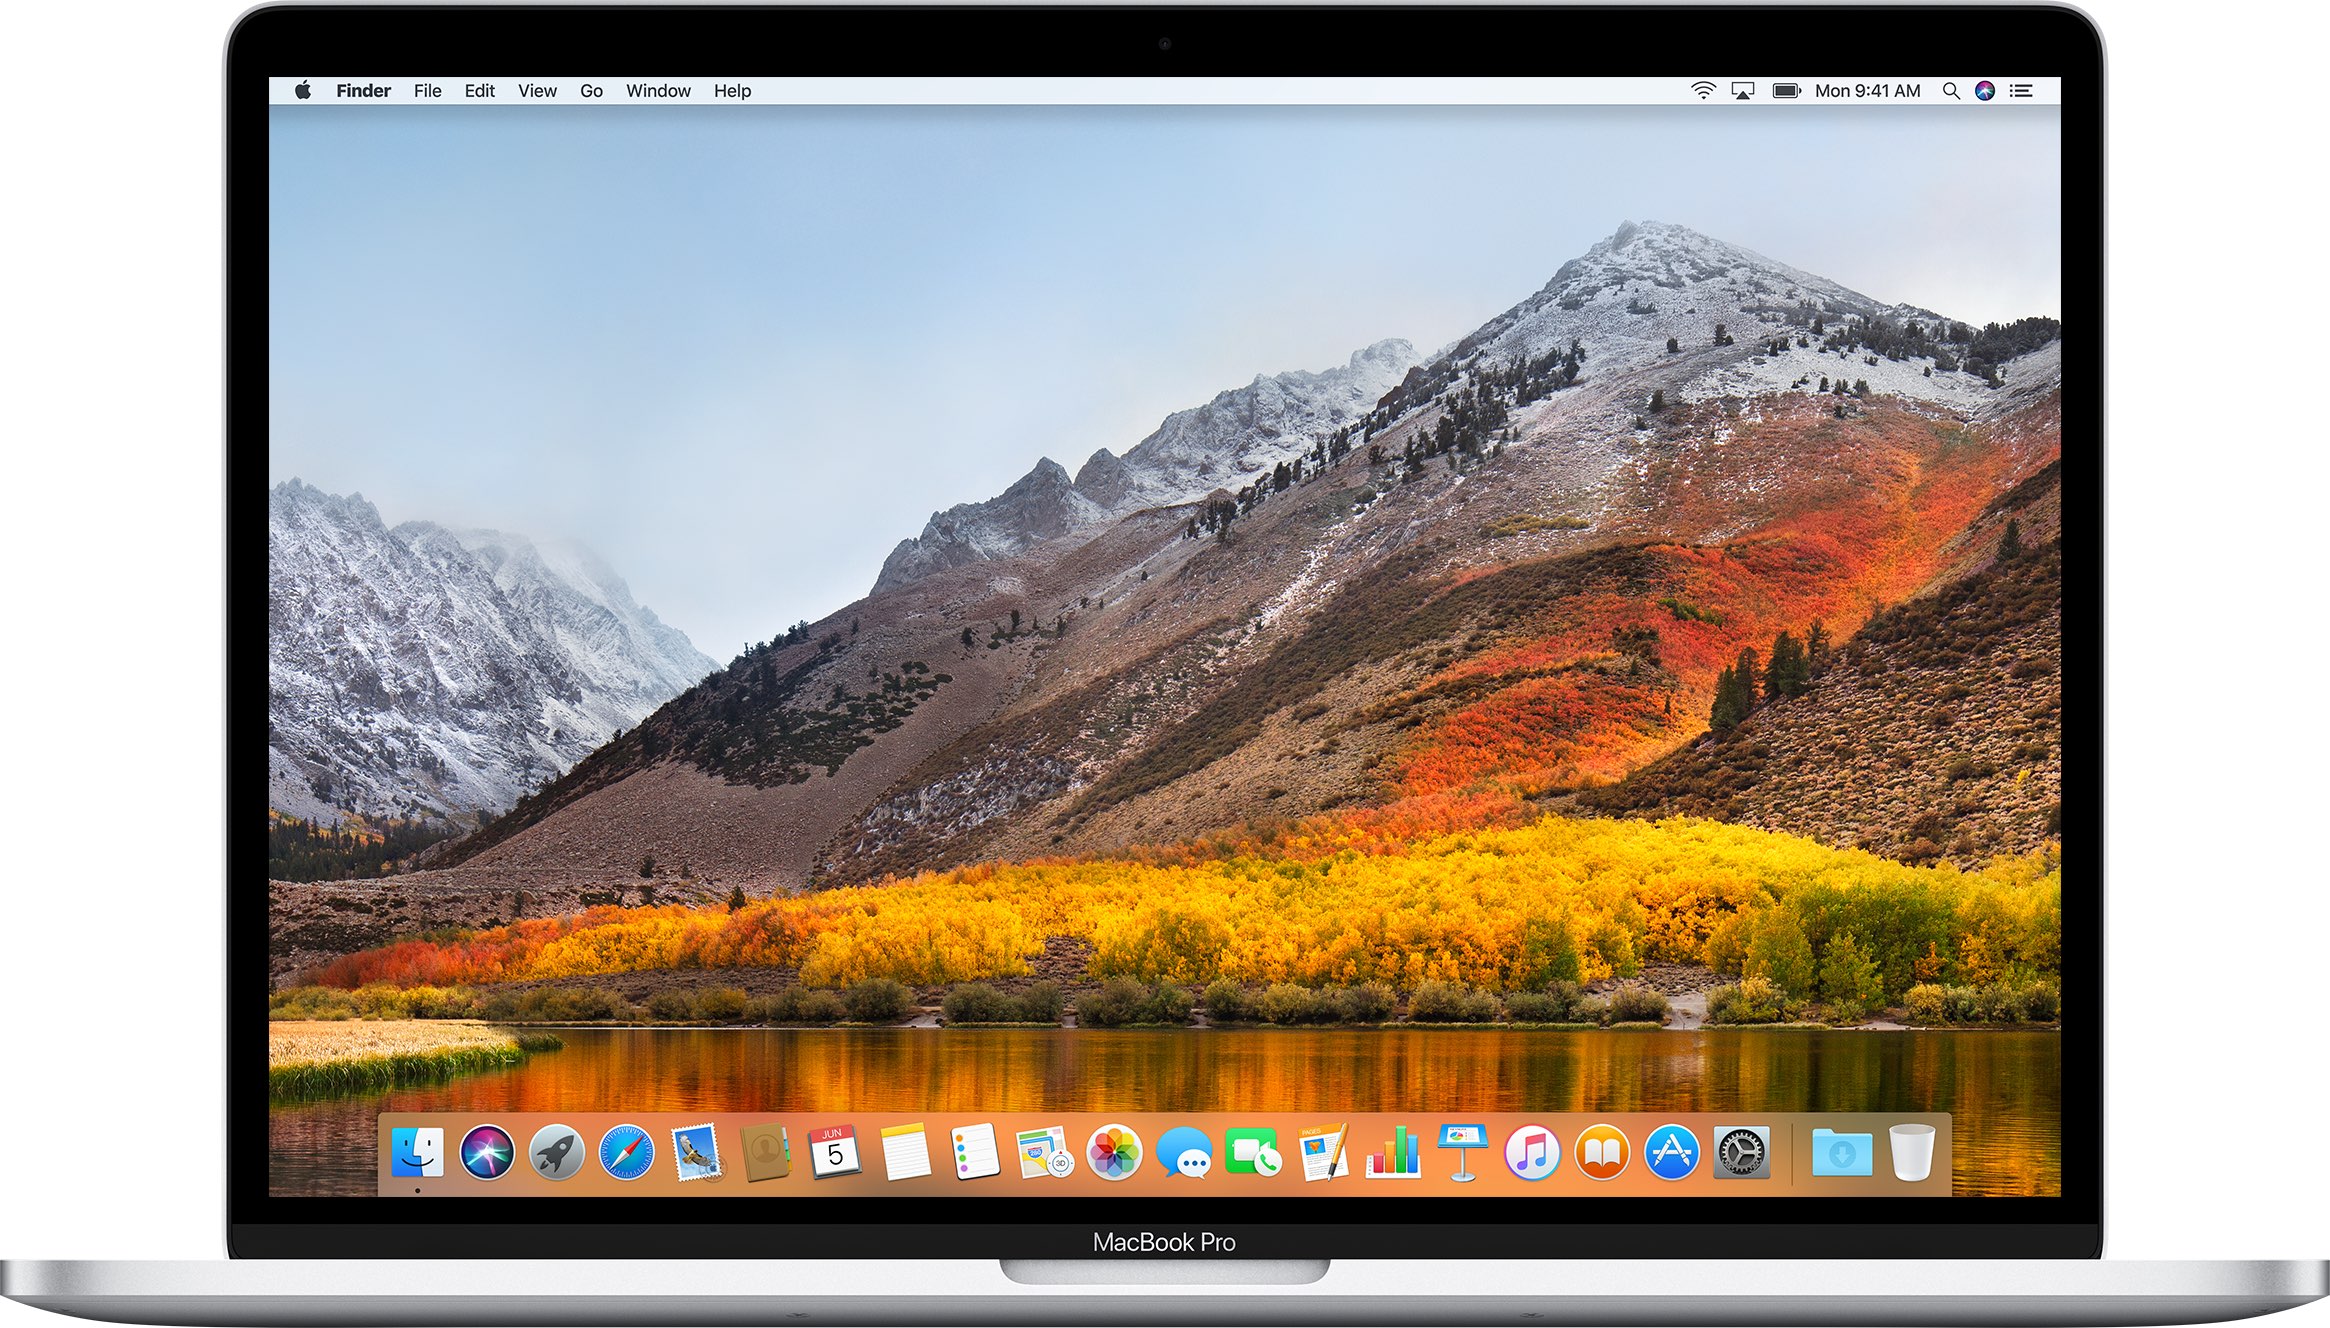 Apple releases macOS High Sierra 10.13 with new file system, Photos